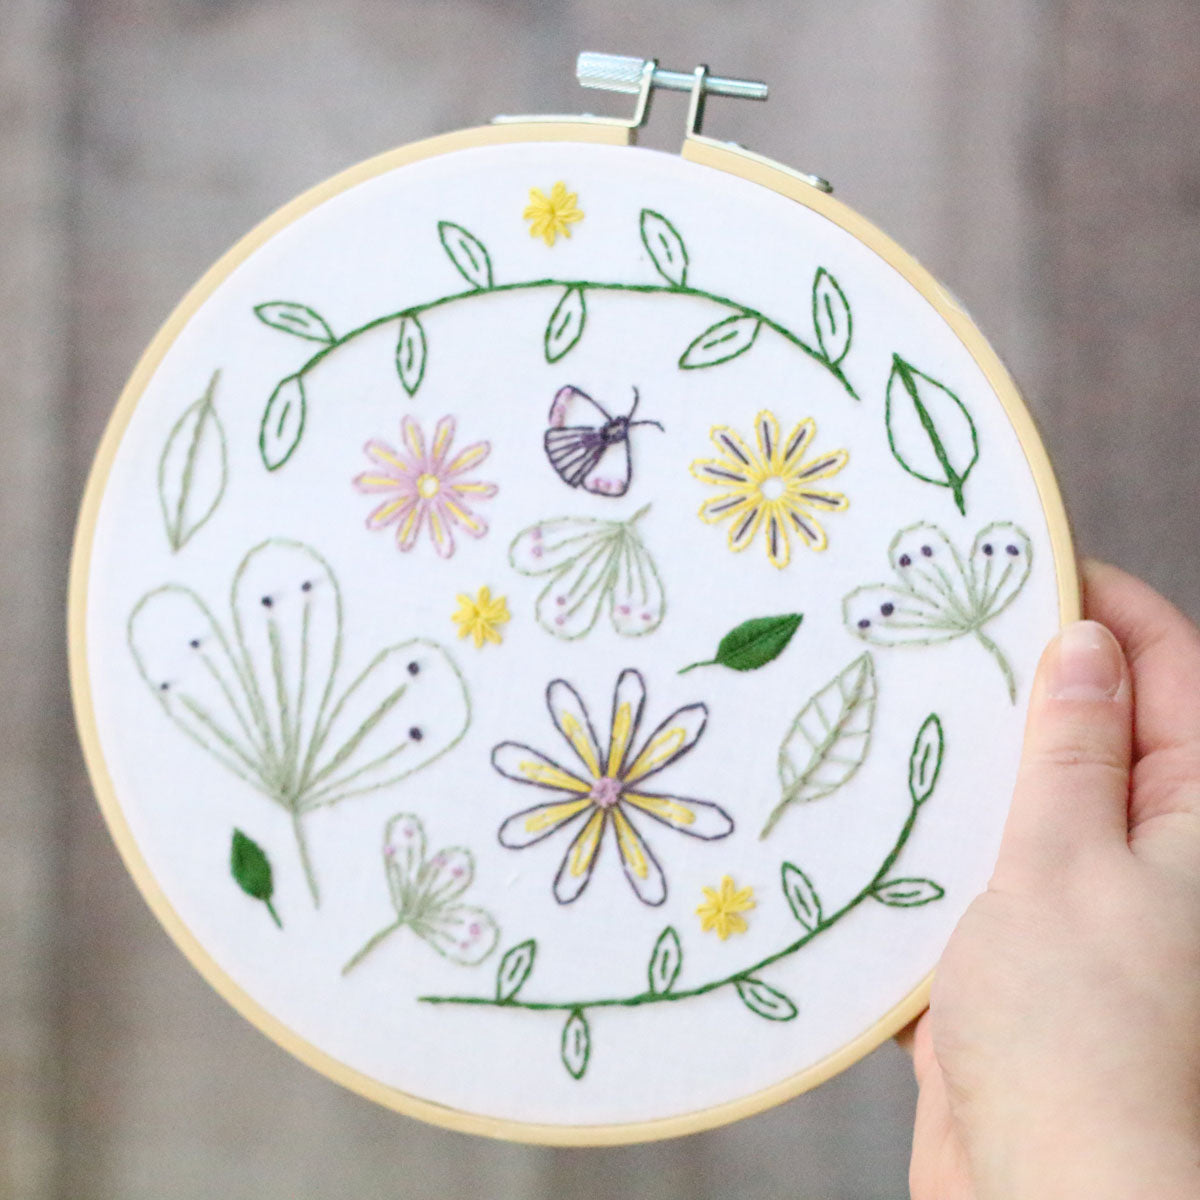 Wildflower Meadow Hand Embroidery Kit